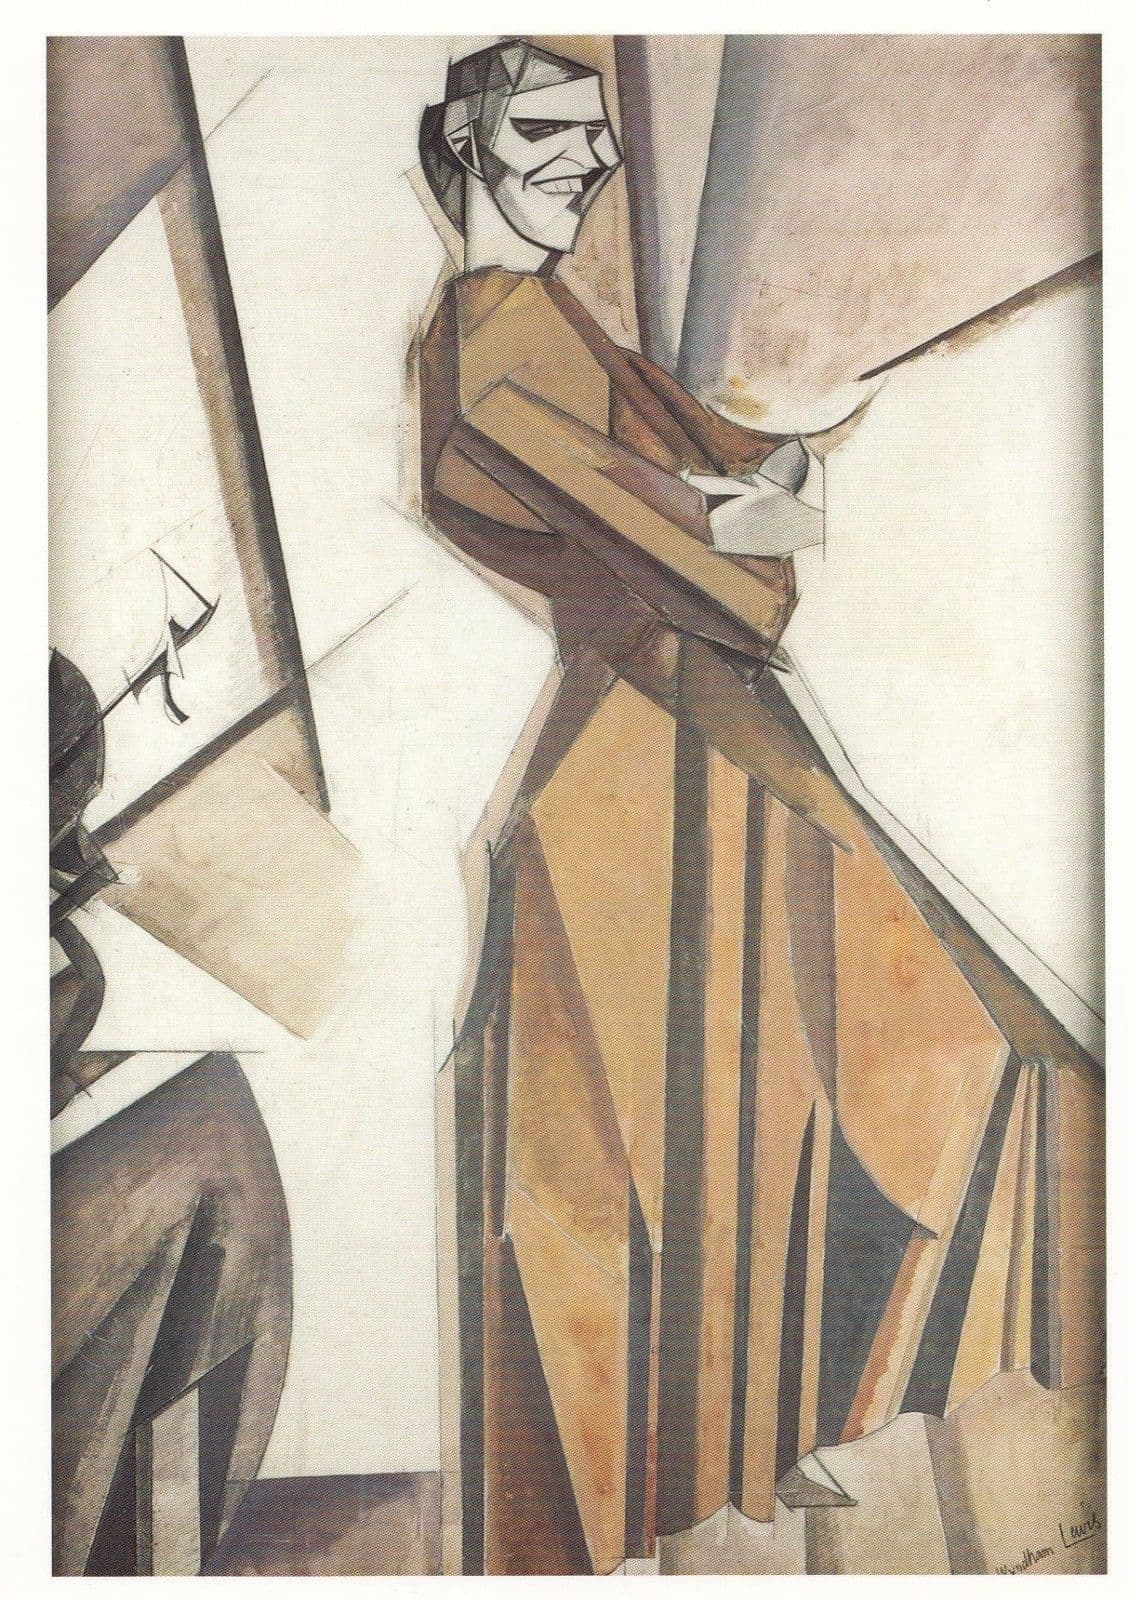 Percy Wyndham Lewis, Smiling Woman Ascending a Stair, c. 1911-1912, Private Collection